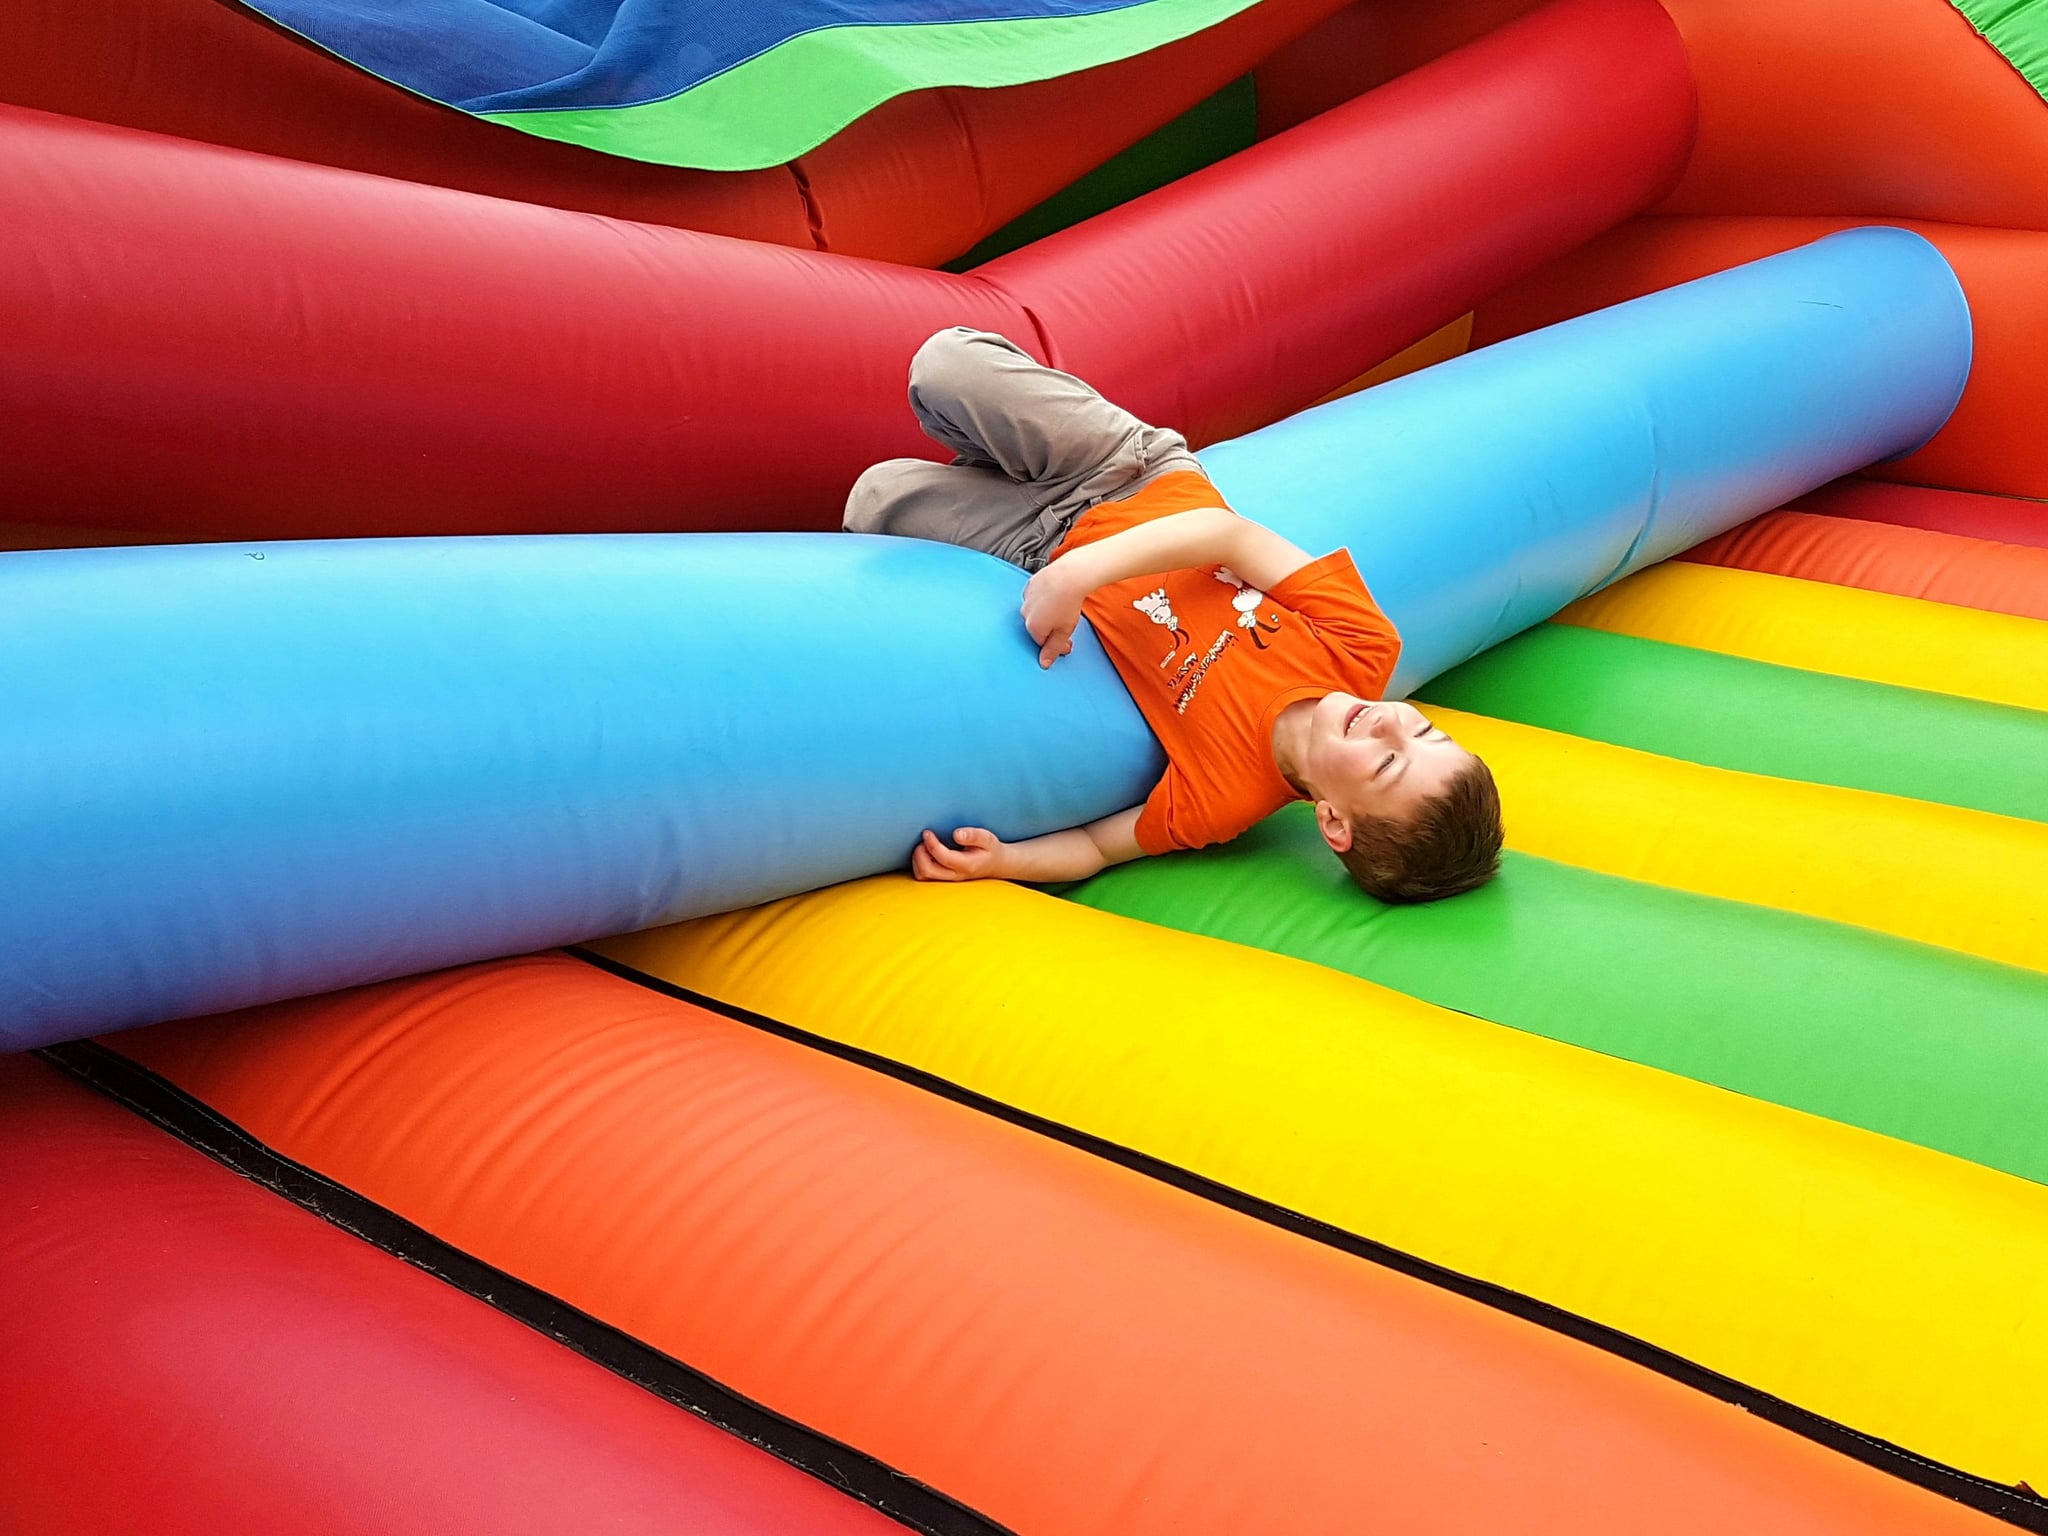 Bounce House Party Games